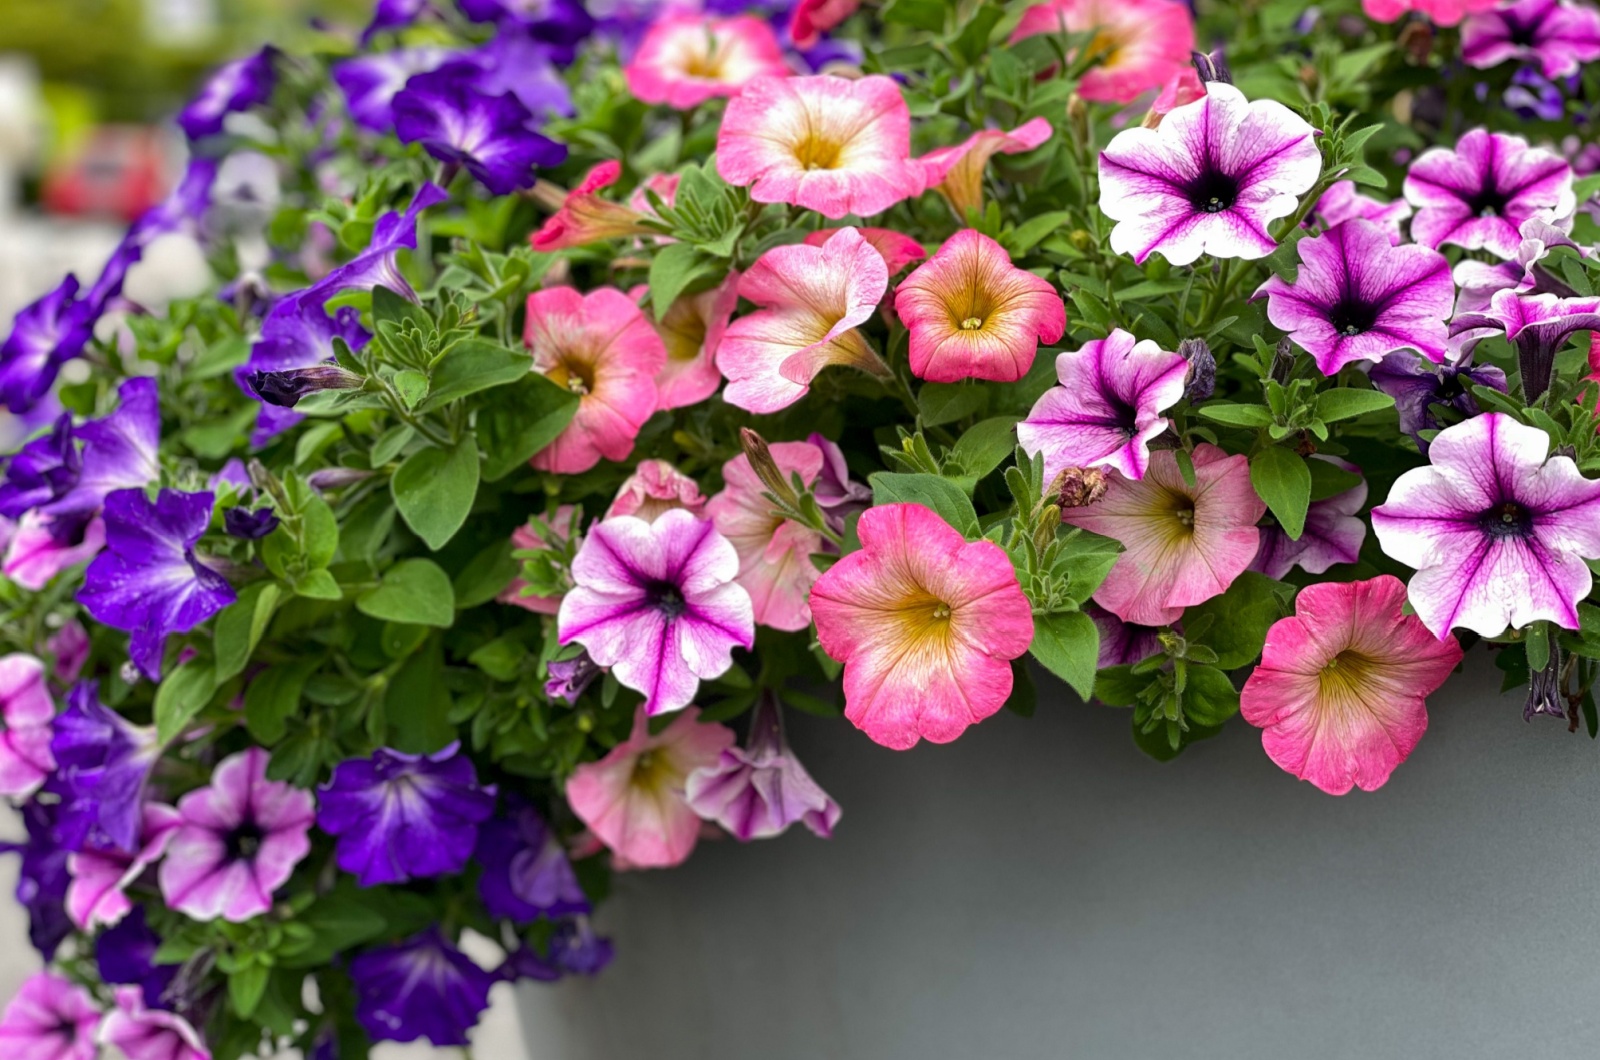 Colourful mixed petunia flowers